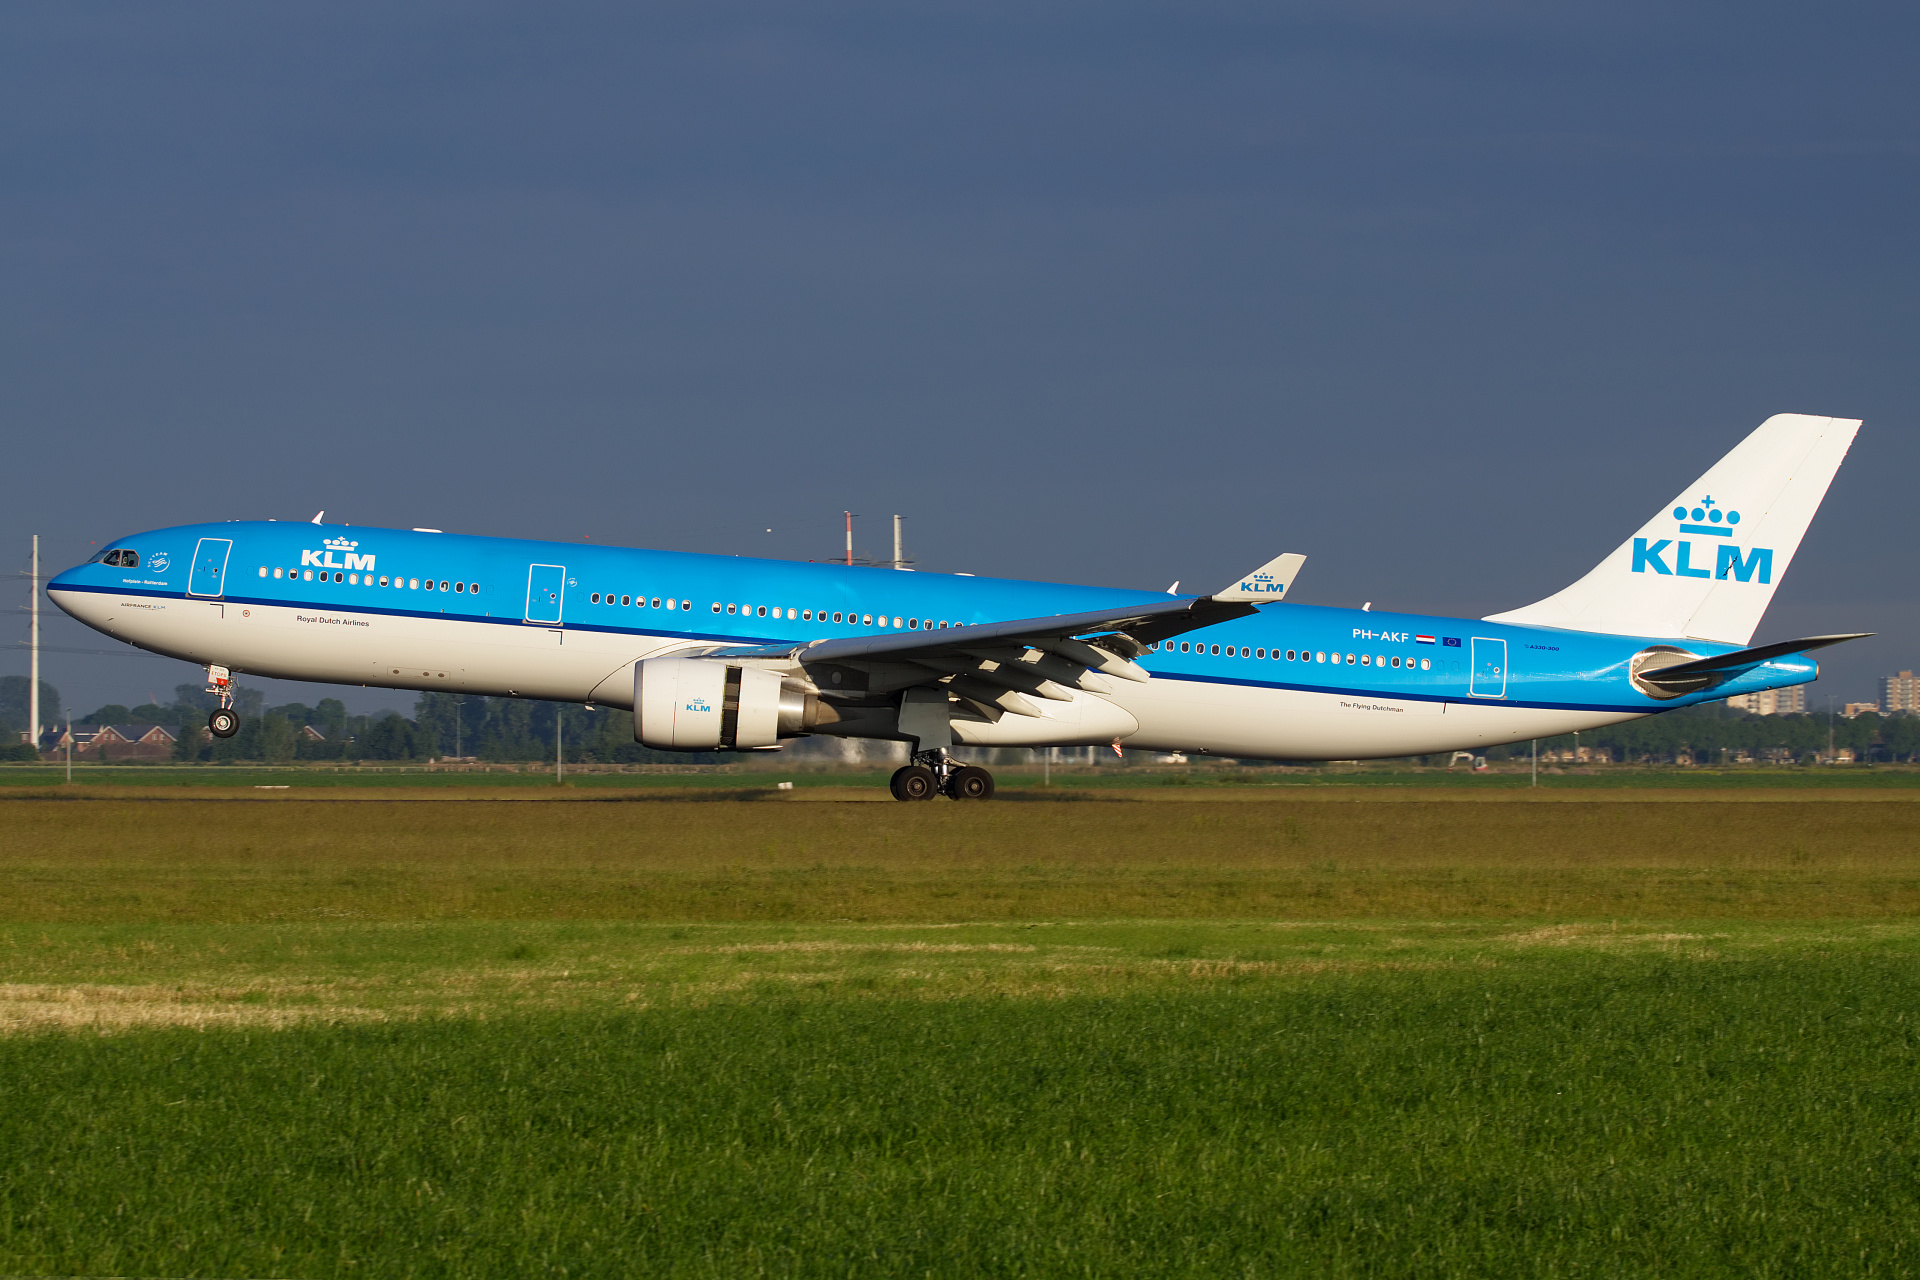 PH-AKF (Aircraft » Schiphol Spotting » Airbus A330-300 » KLM Royal Dutch Airlines)